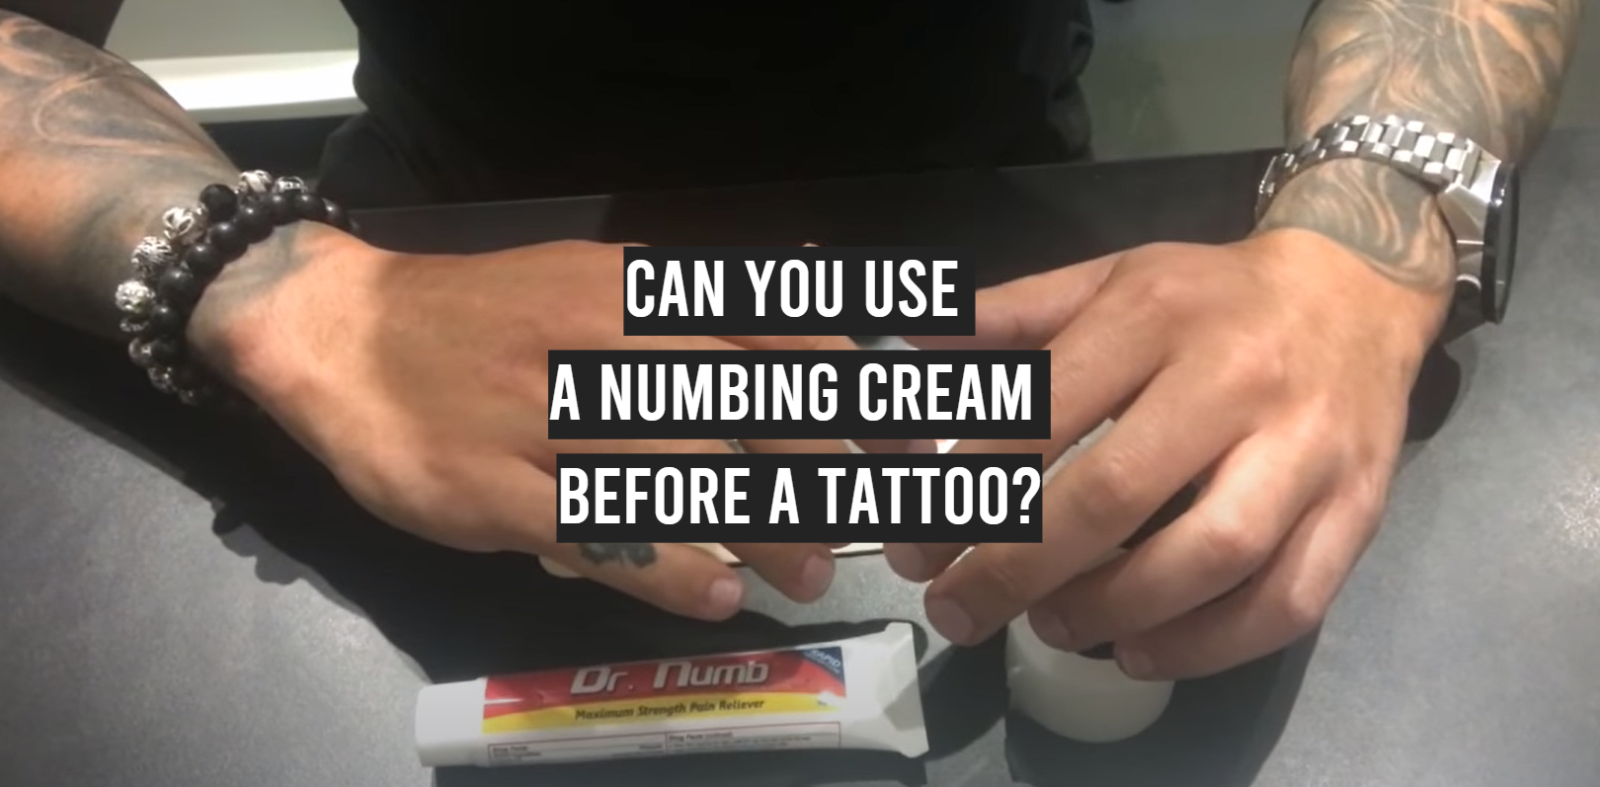 Can You Use a Numbing Cream Before a Tattoo?